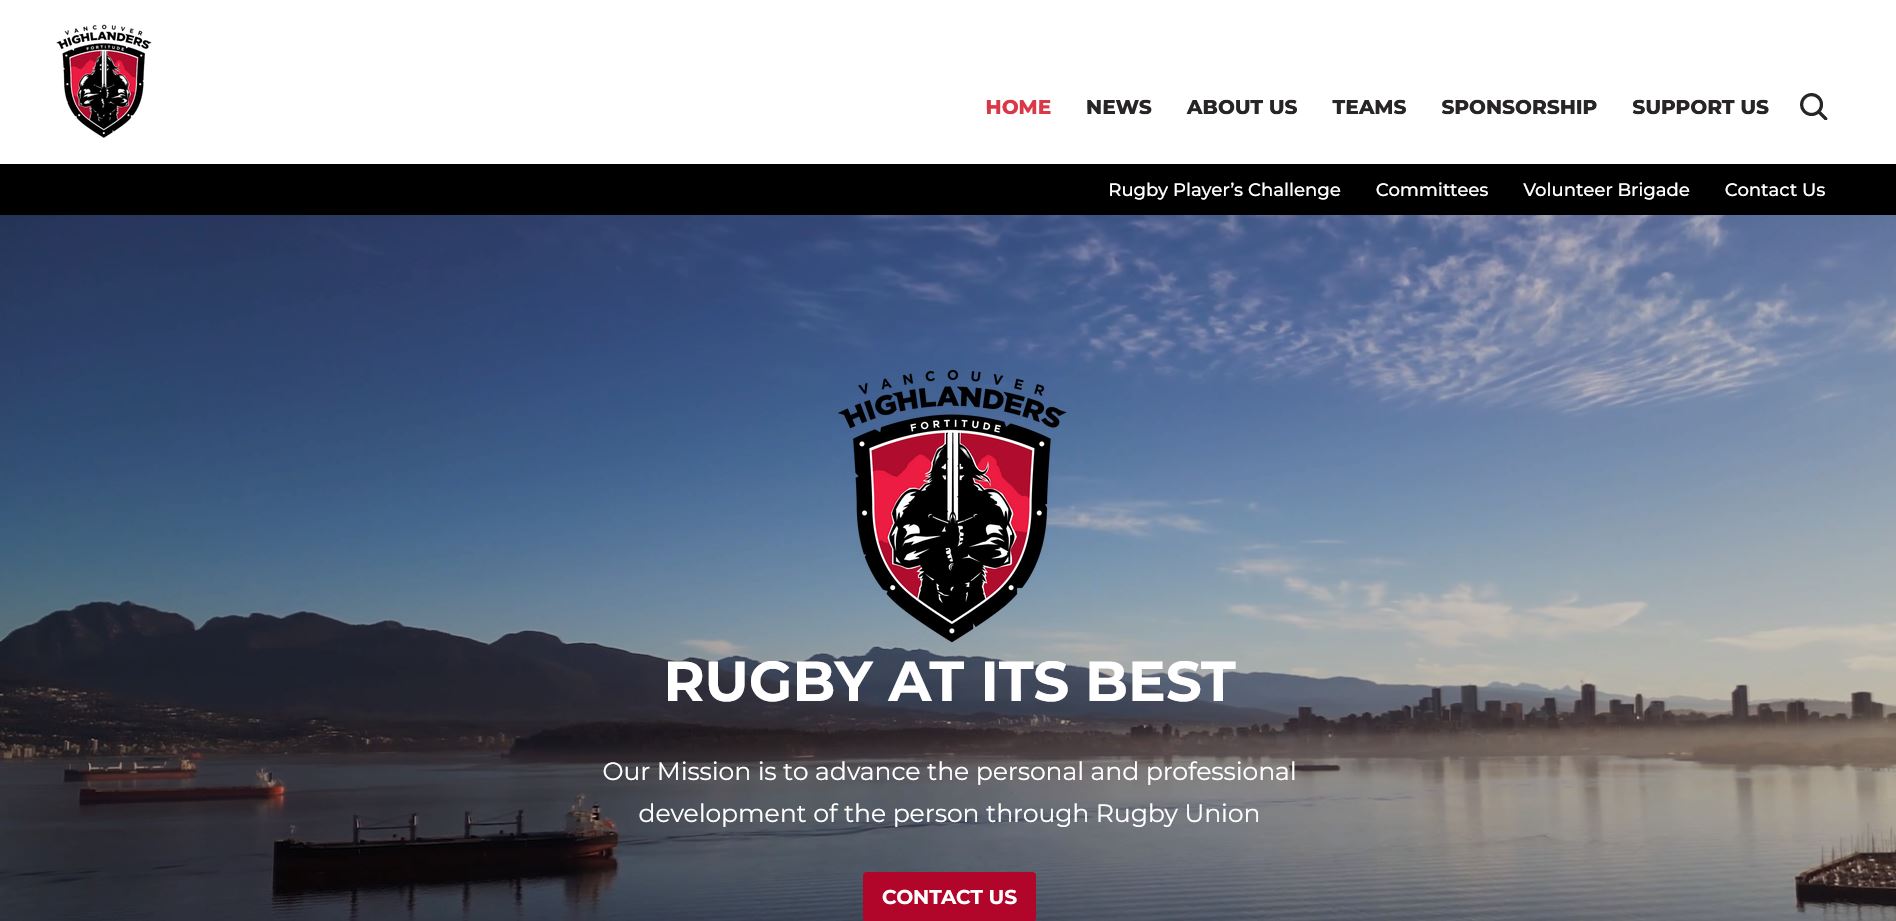 The Vancouver Highlanders website, developed by OptoMedia